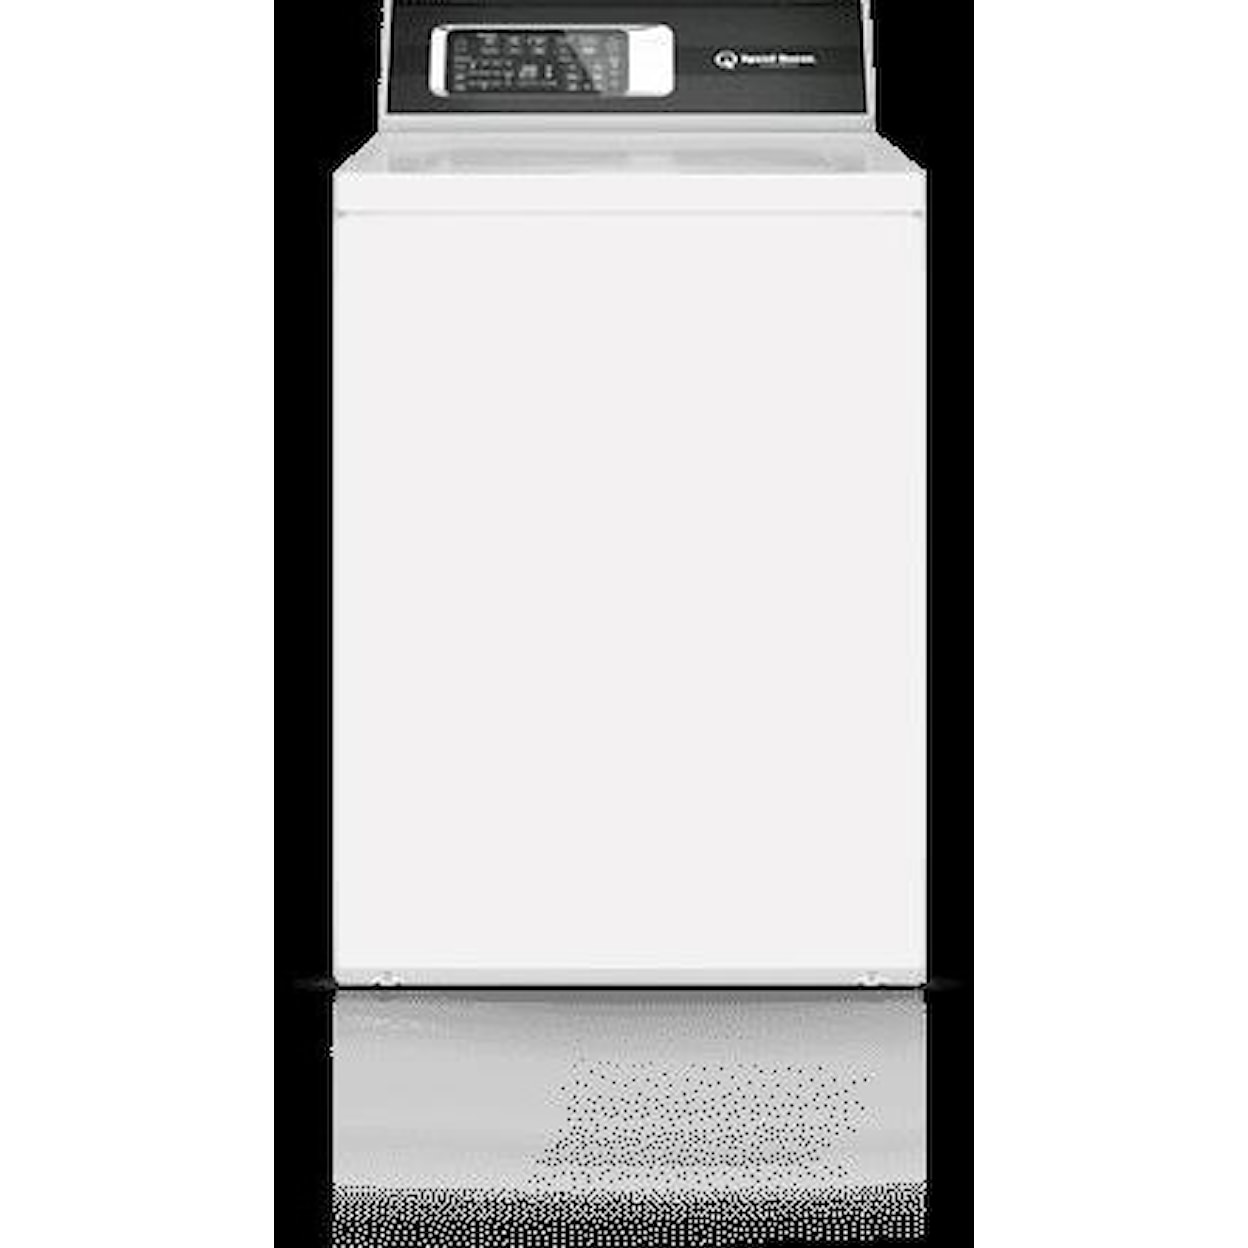 Speed Queen Washers 3.2 CU FT WASHER